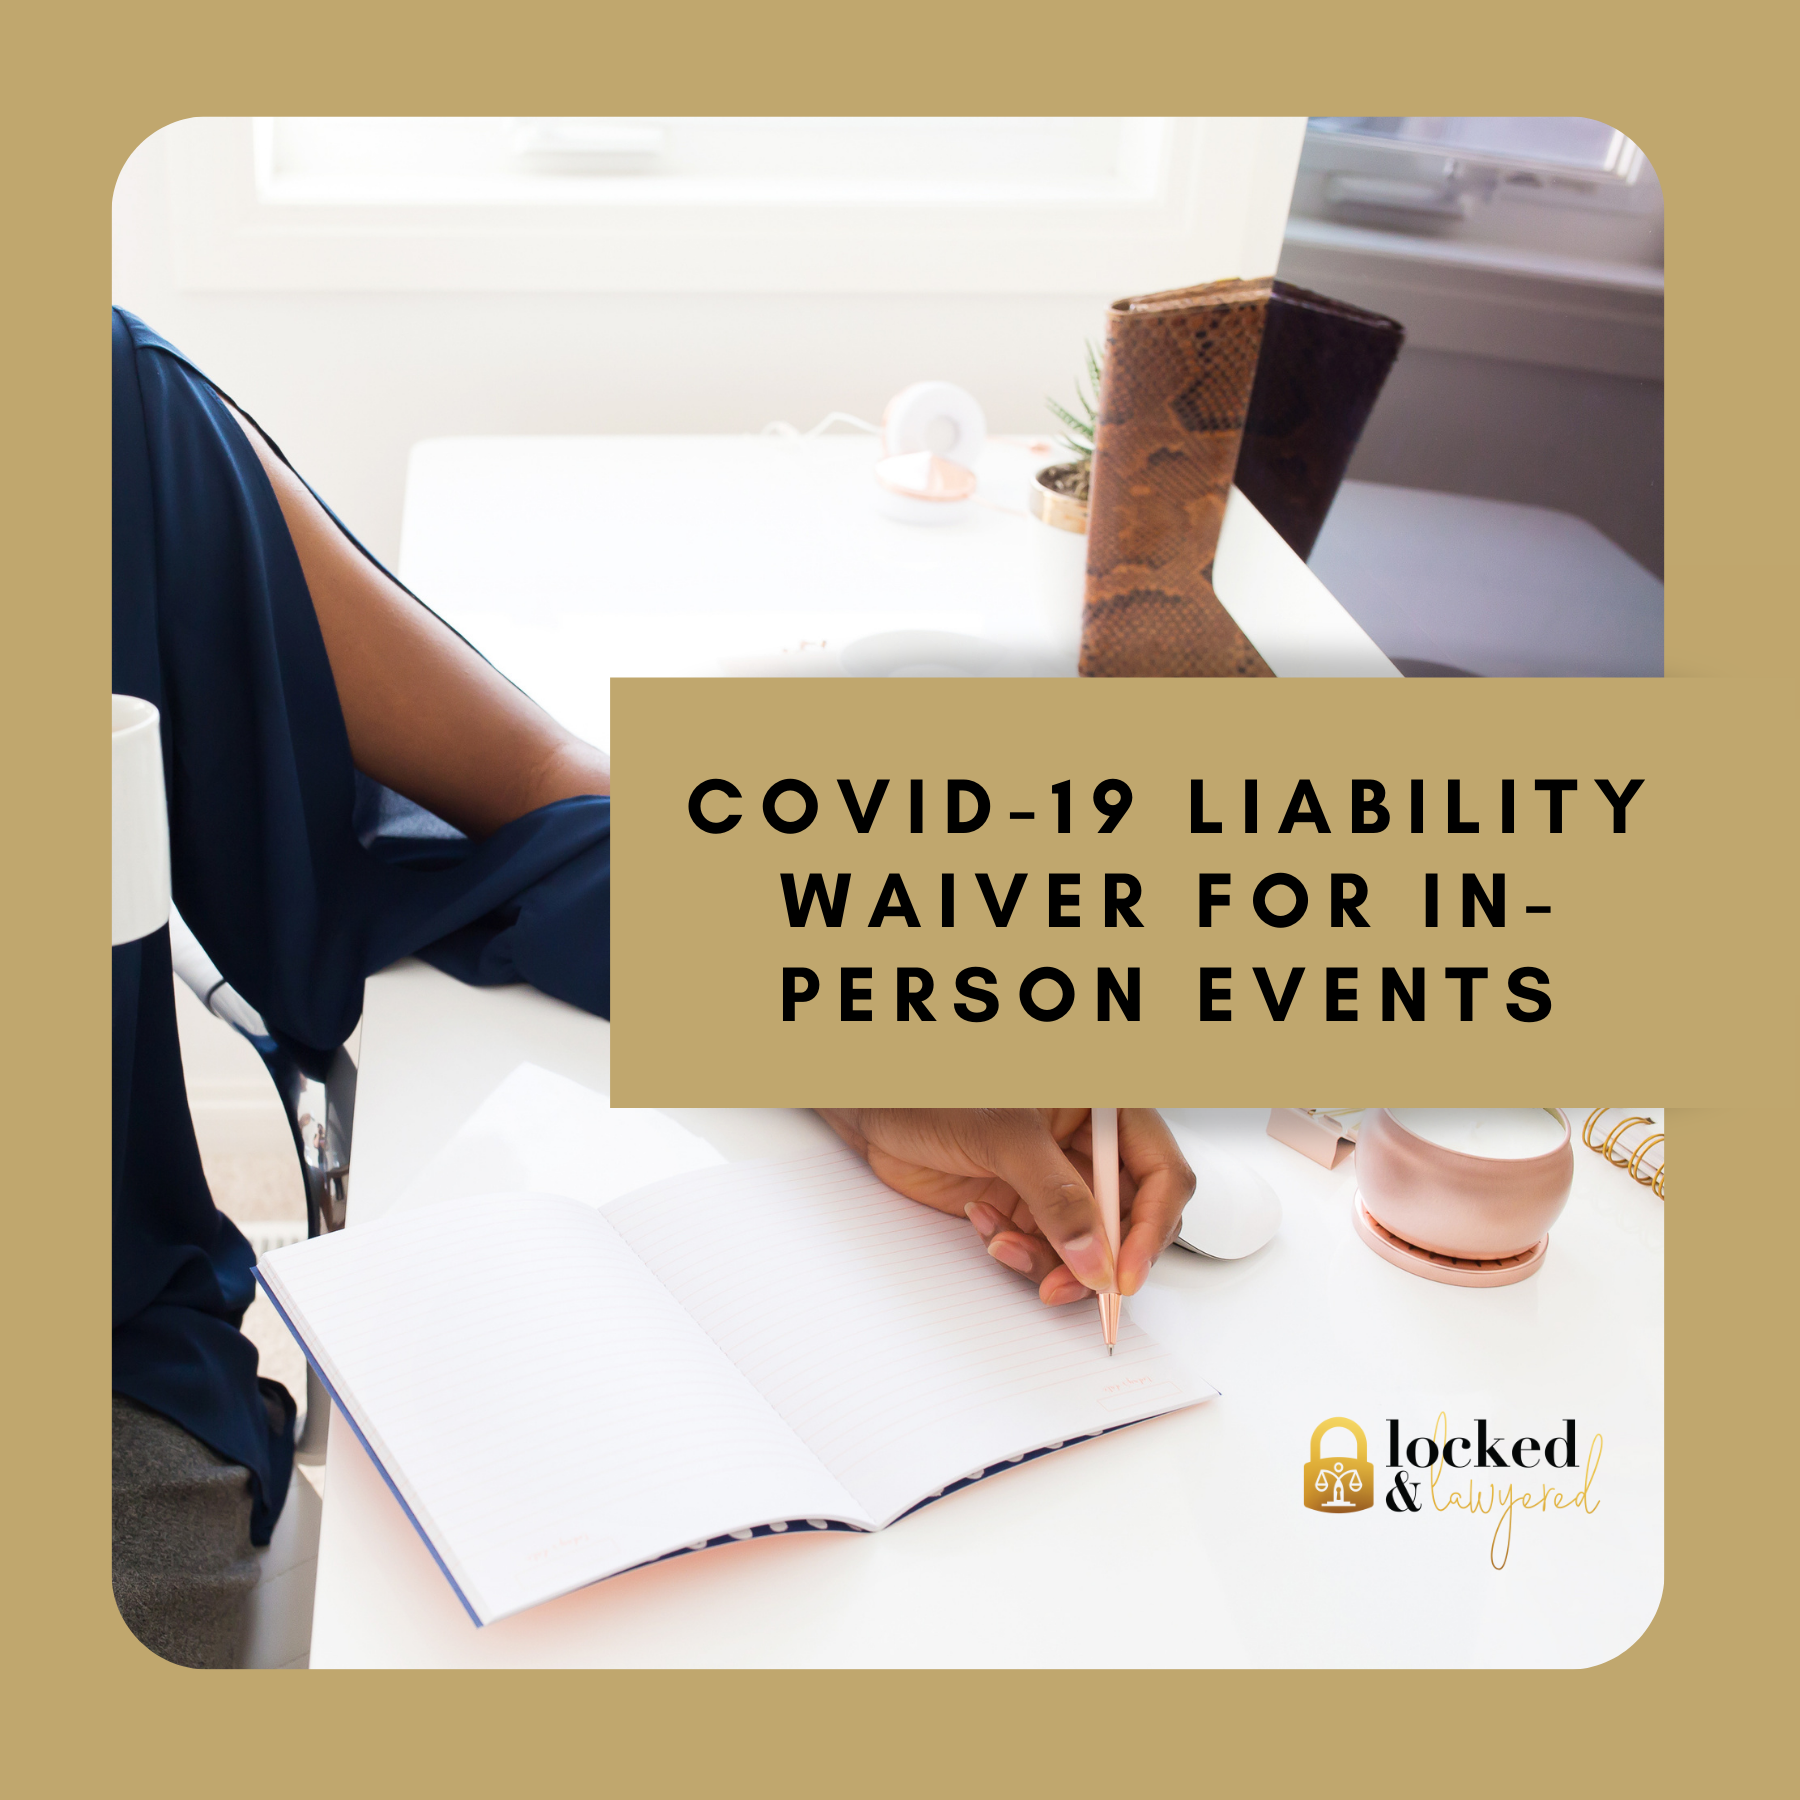 COVID-19 Liability Waiver for In-Person Events